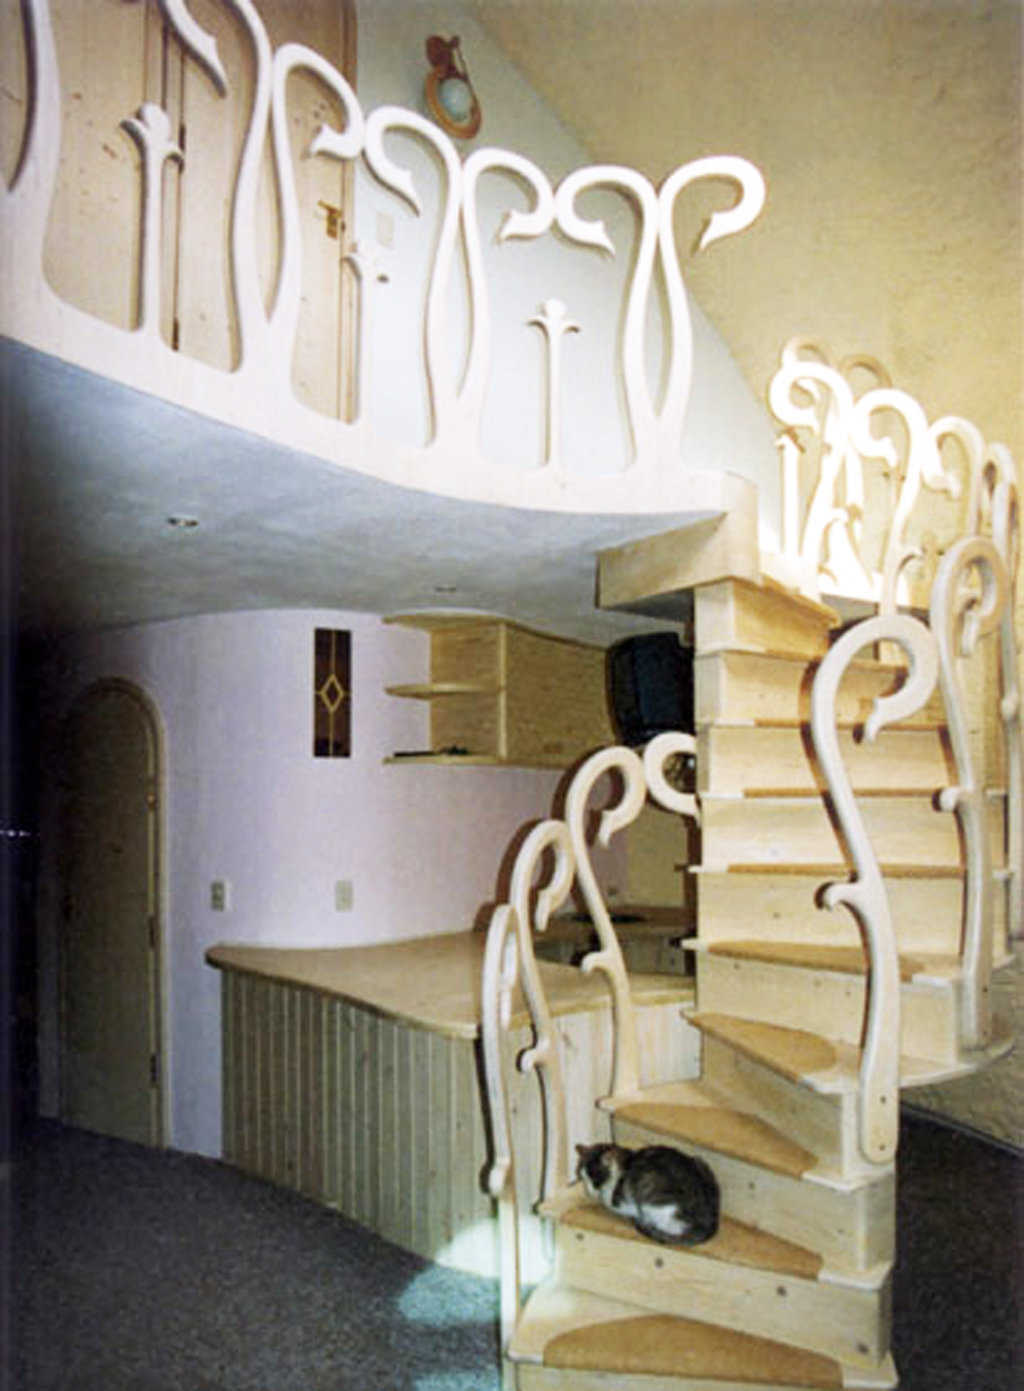 Staircase — This custom-designed staircase saves space by doubling back on itself.